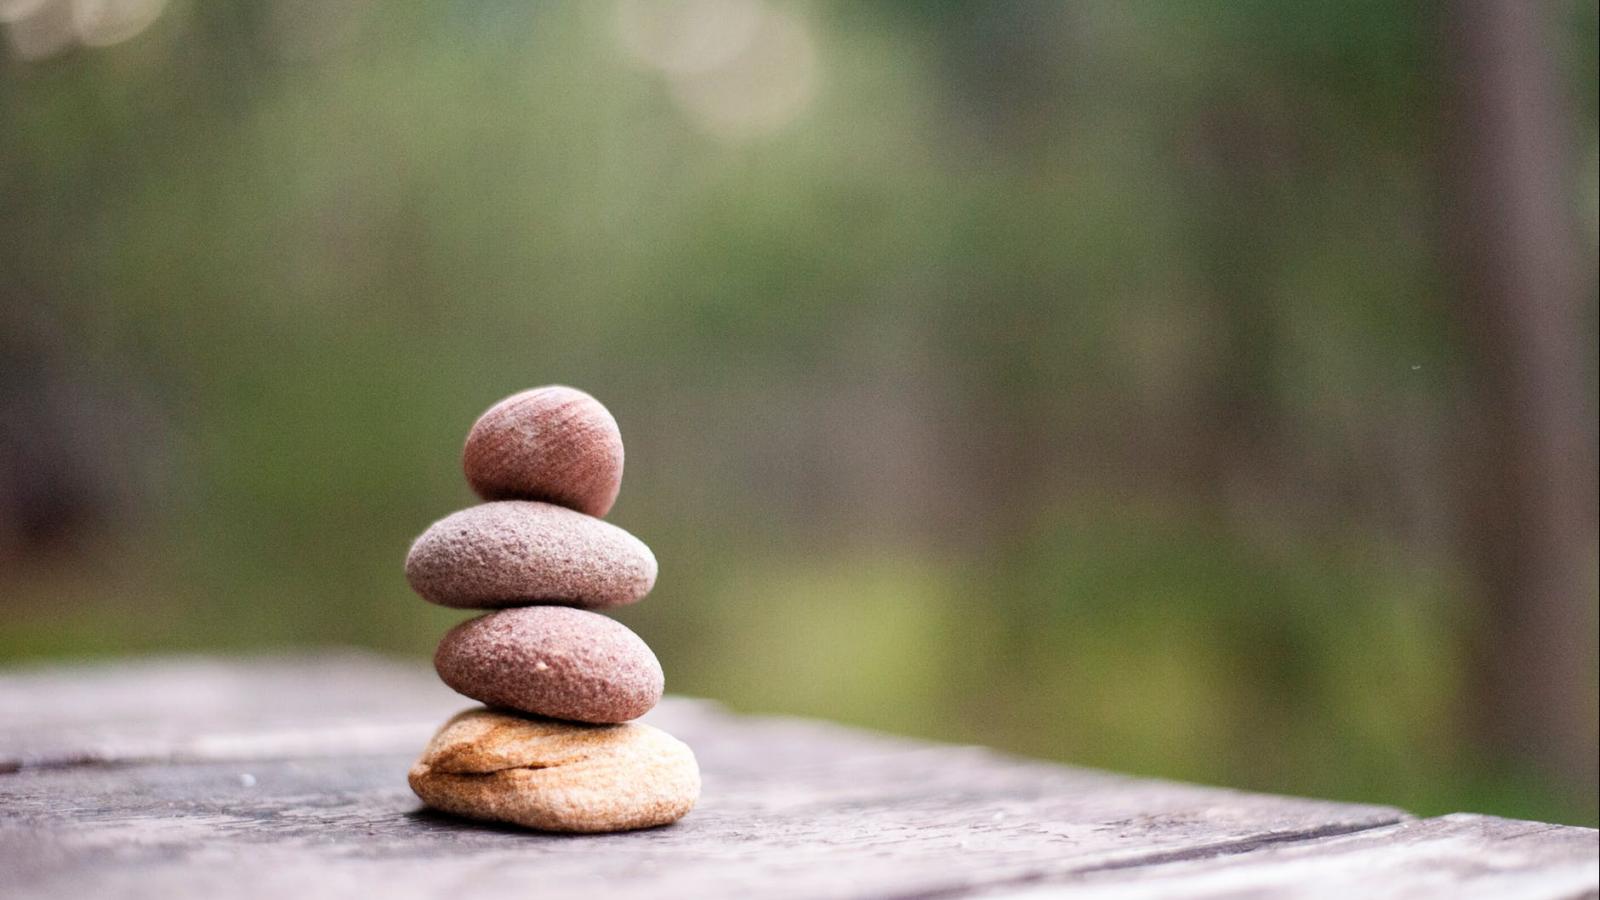 A small stack of 5 rocks with a blurred background. 